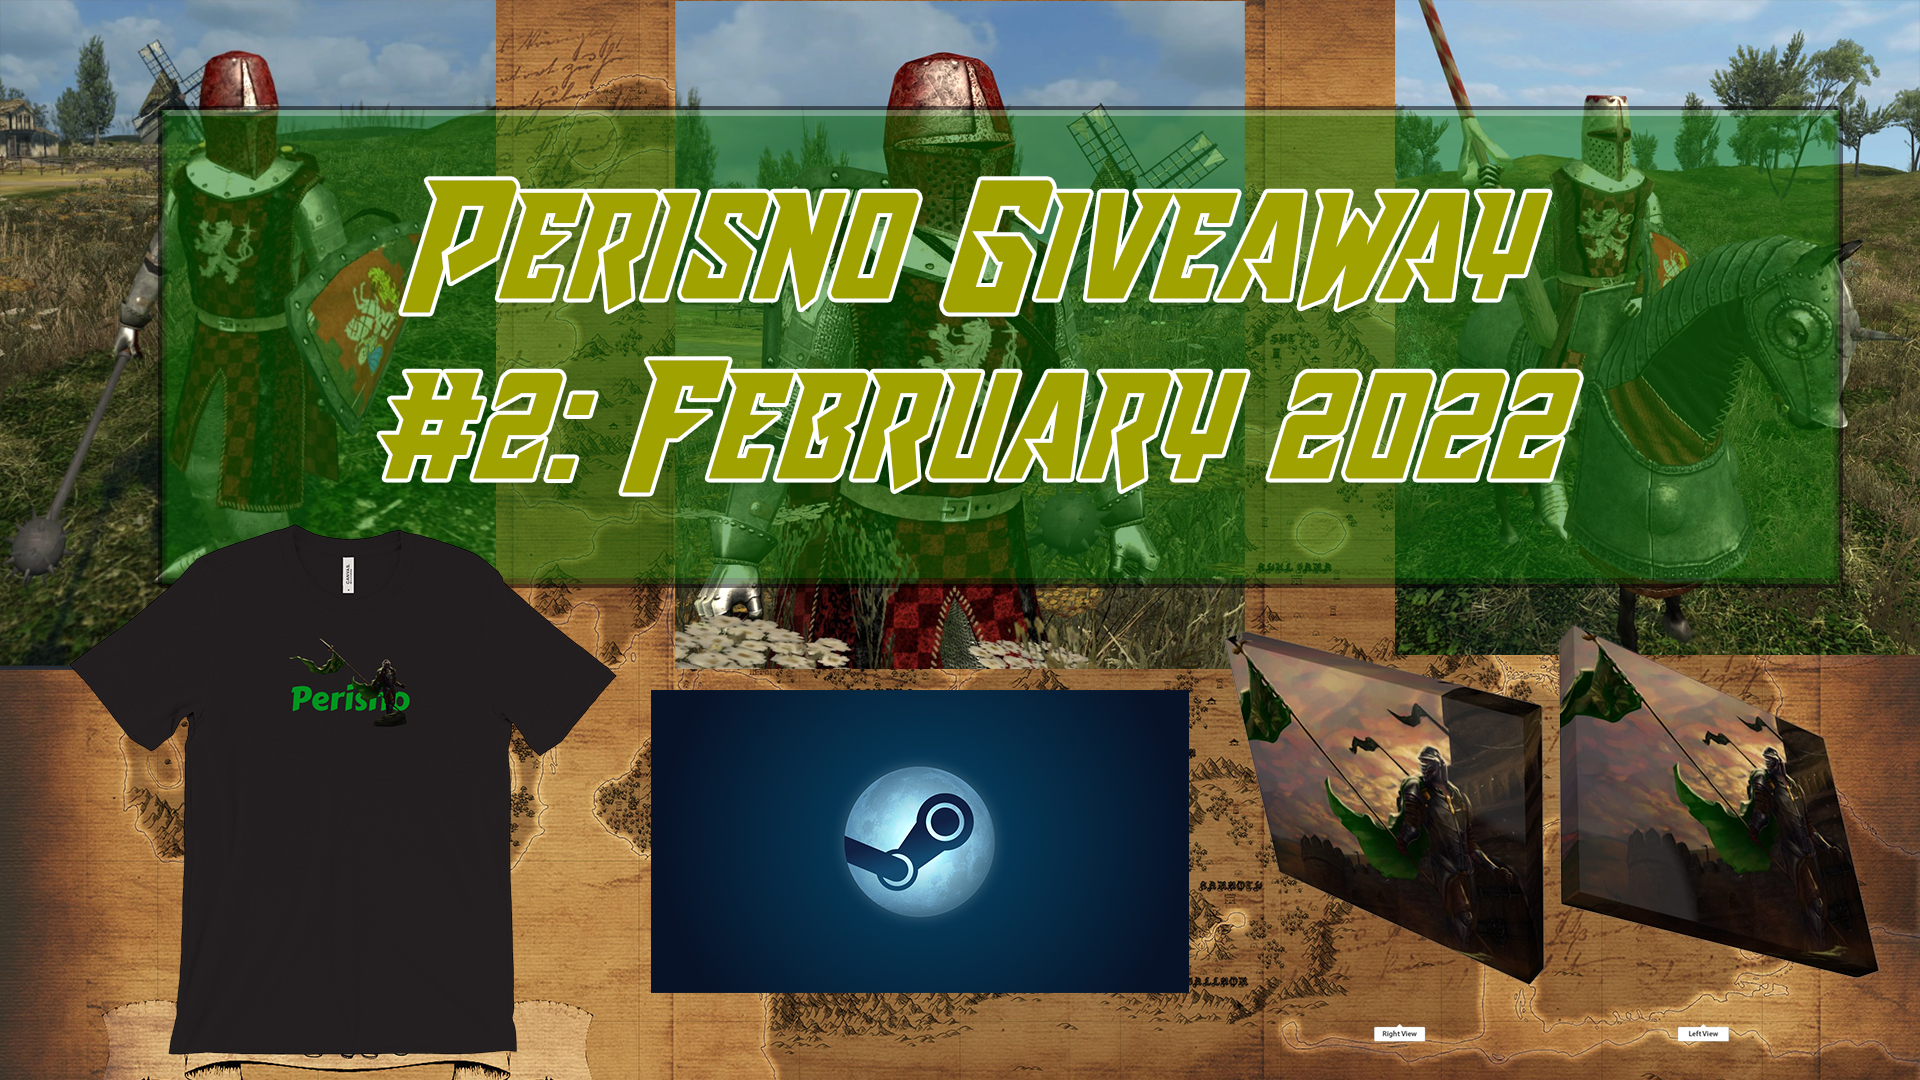 February wallpaper giveaway!